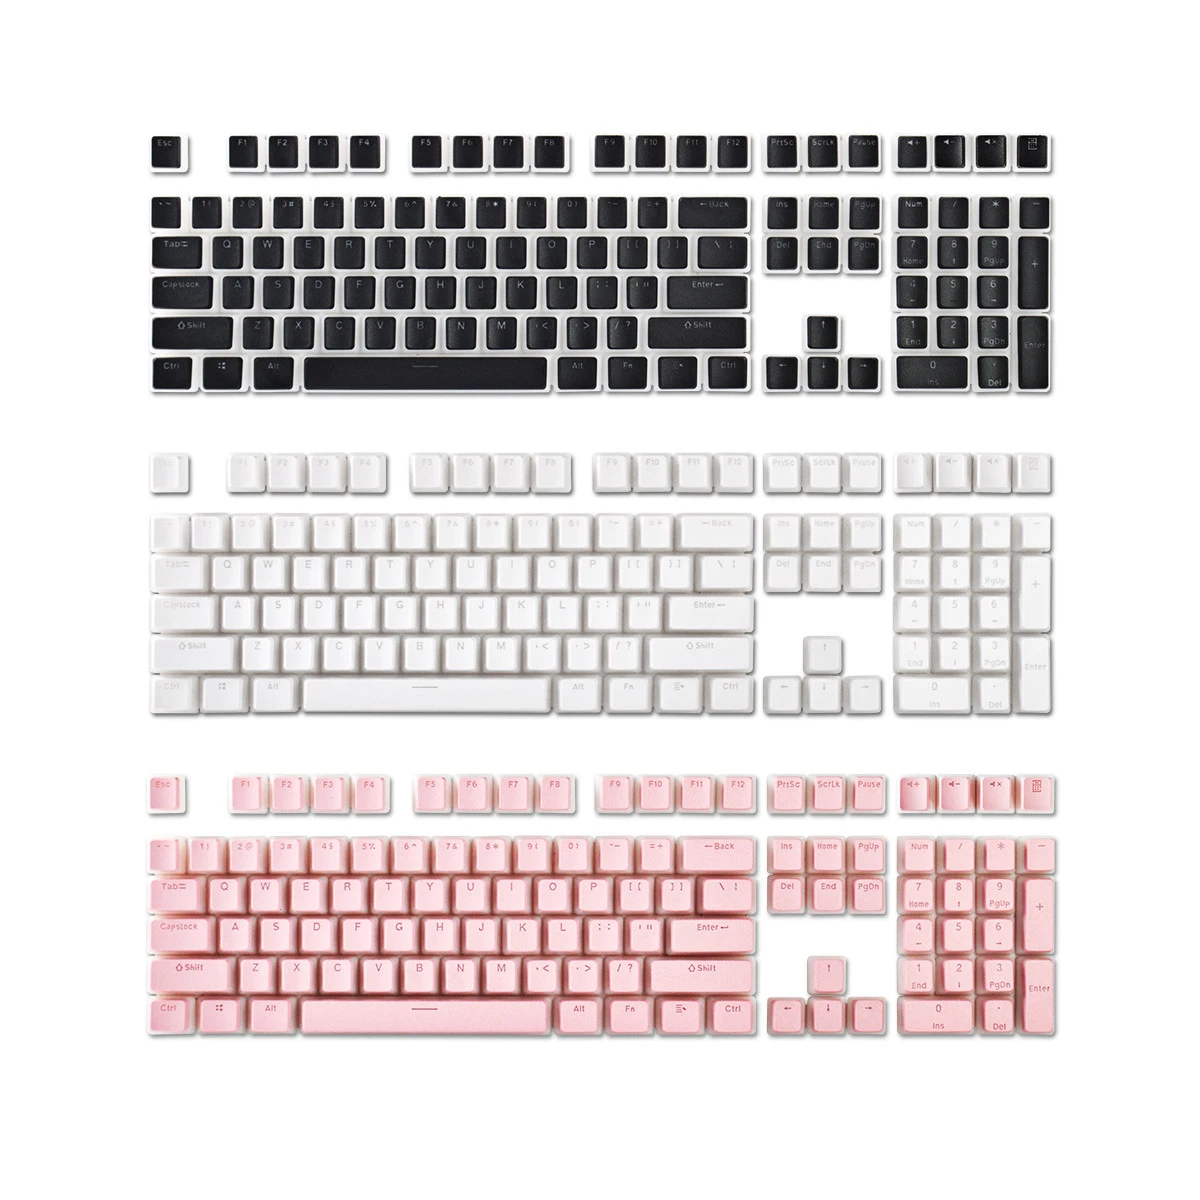 129 Keys PBT Keycap Double Layer Pudding Keycaps English Personalized Glow Keycaps for Cherry MX Switch 4 - Pudding Keycap